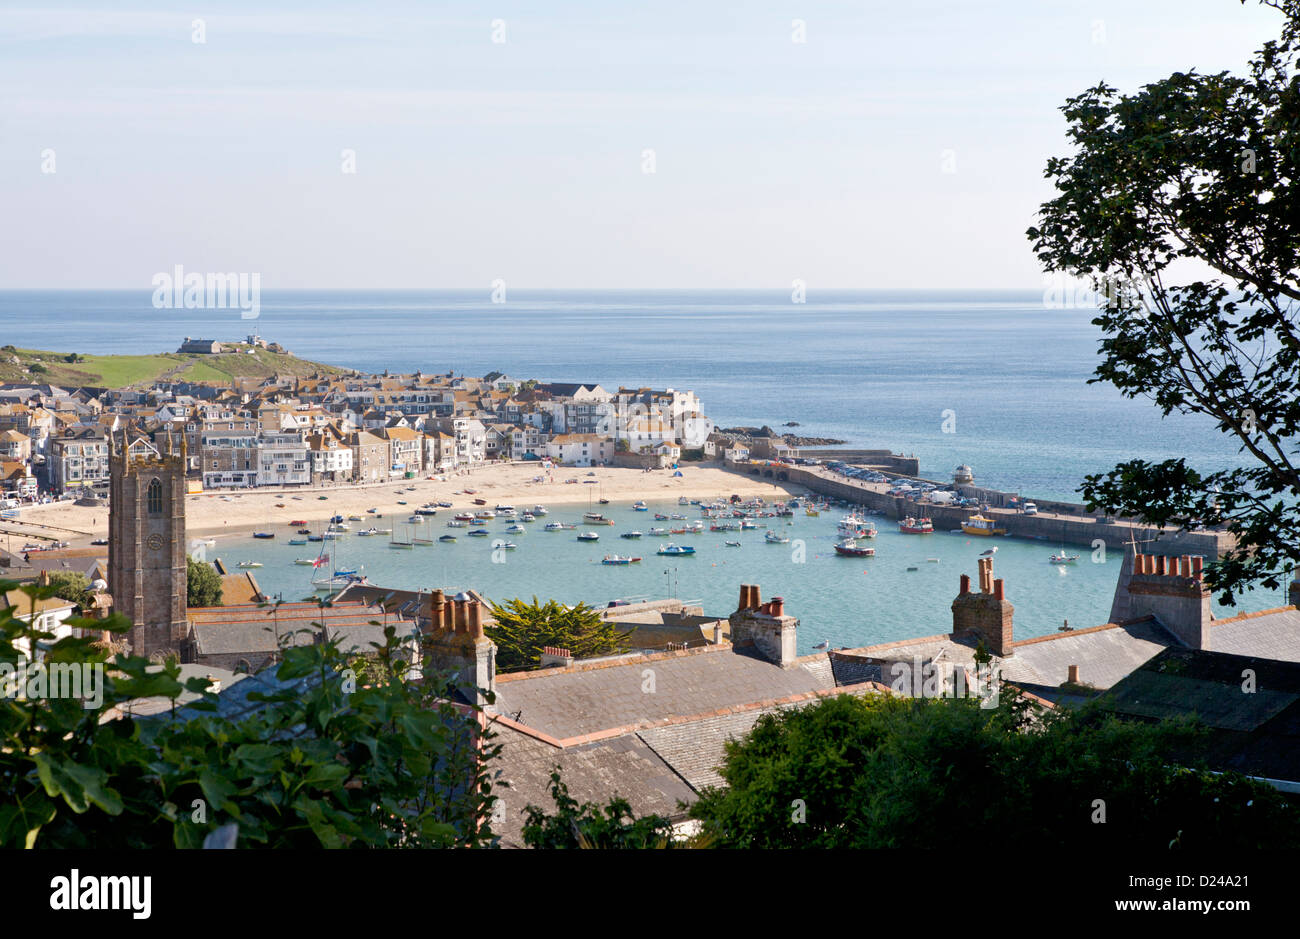 St Ives harbour viewed over rooftops with the tide in. Cornwall UK Stock Photo